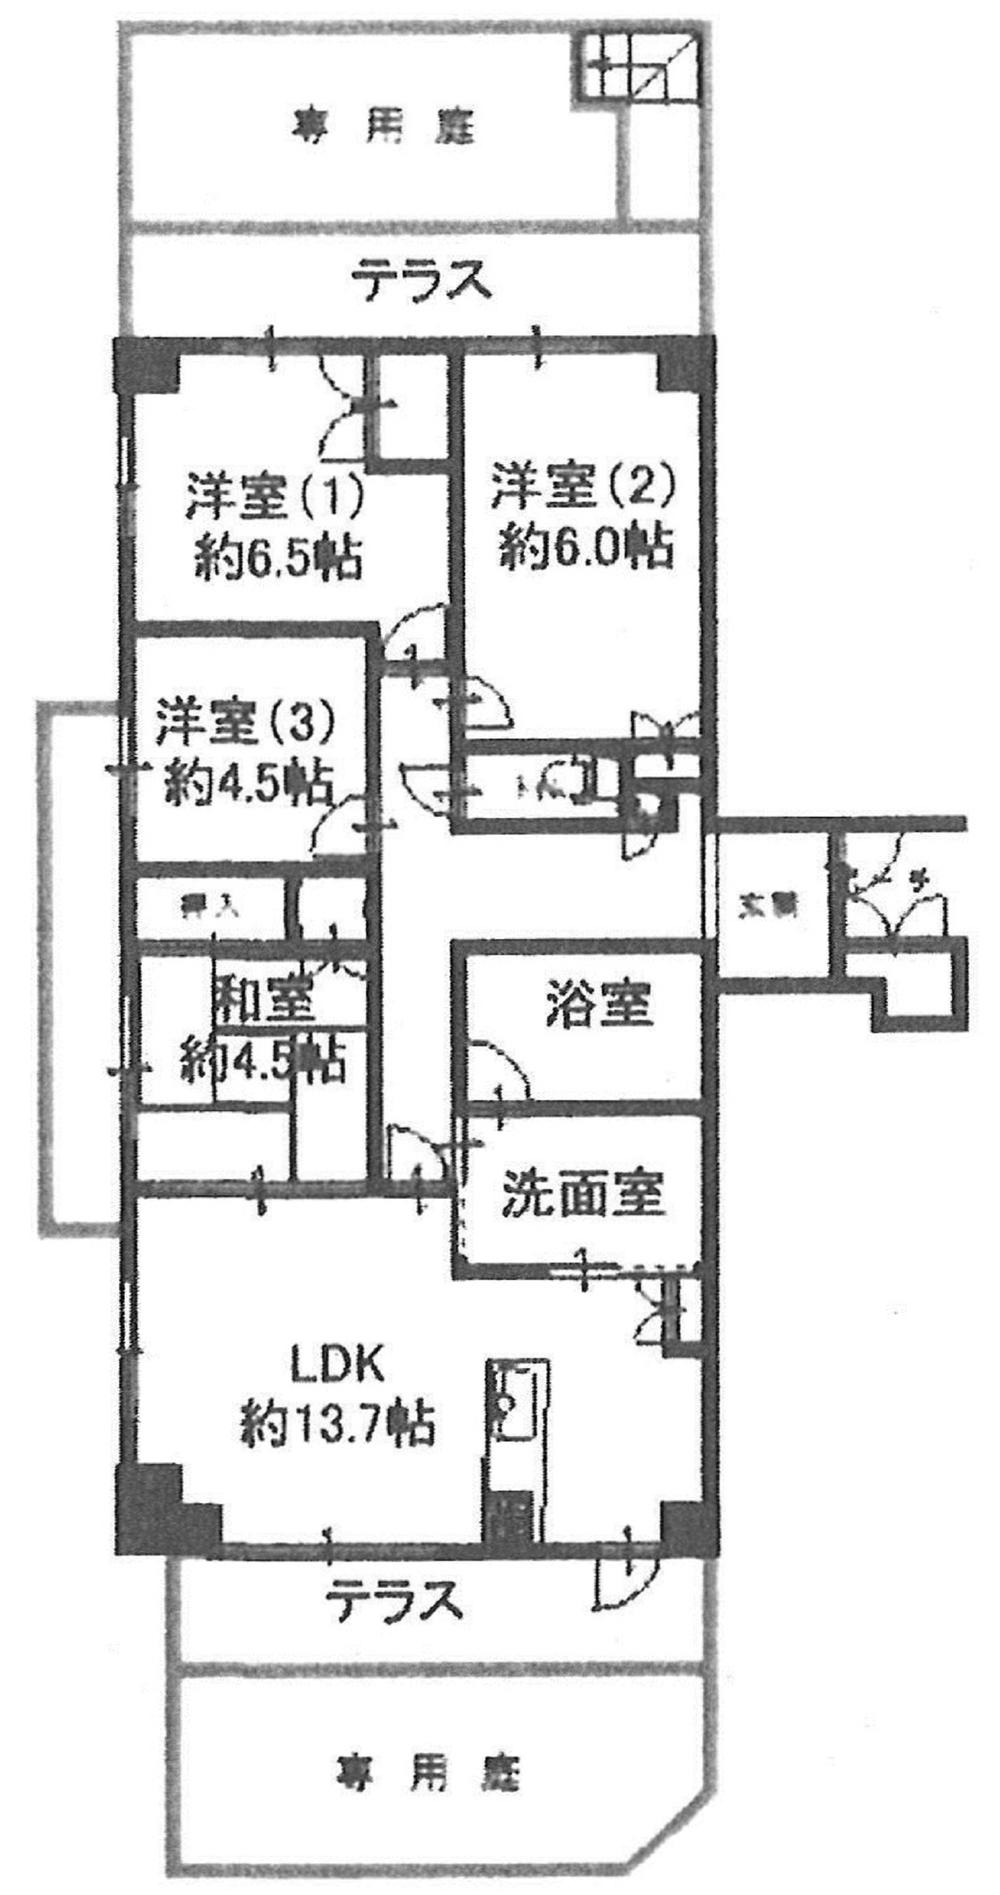 Floor plan. 4LDK, Price 33,900,000 yen, The area occupied by 81.8 sq m 2 side terrace, Per yang ・ Ventilation good. By external heat insulation specification, cold ・ Effect is located on the long life of suppression and building of heating costs.